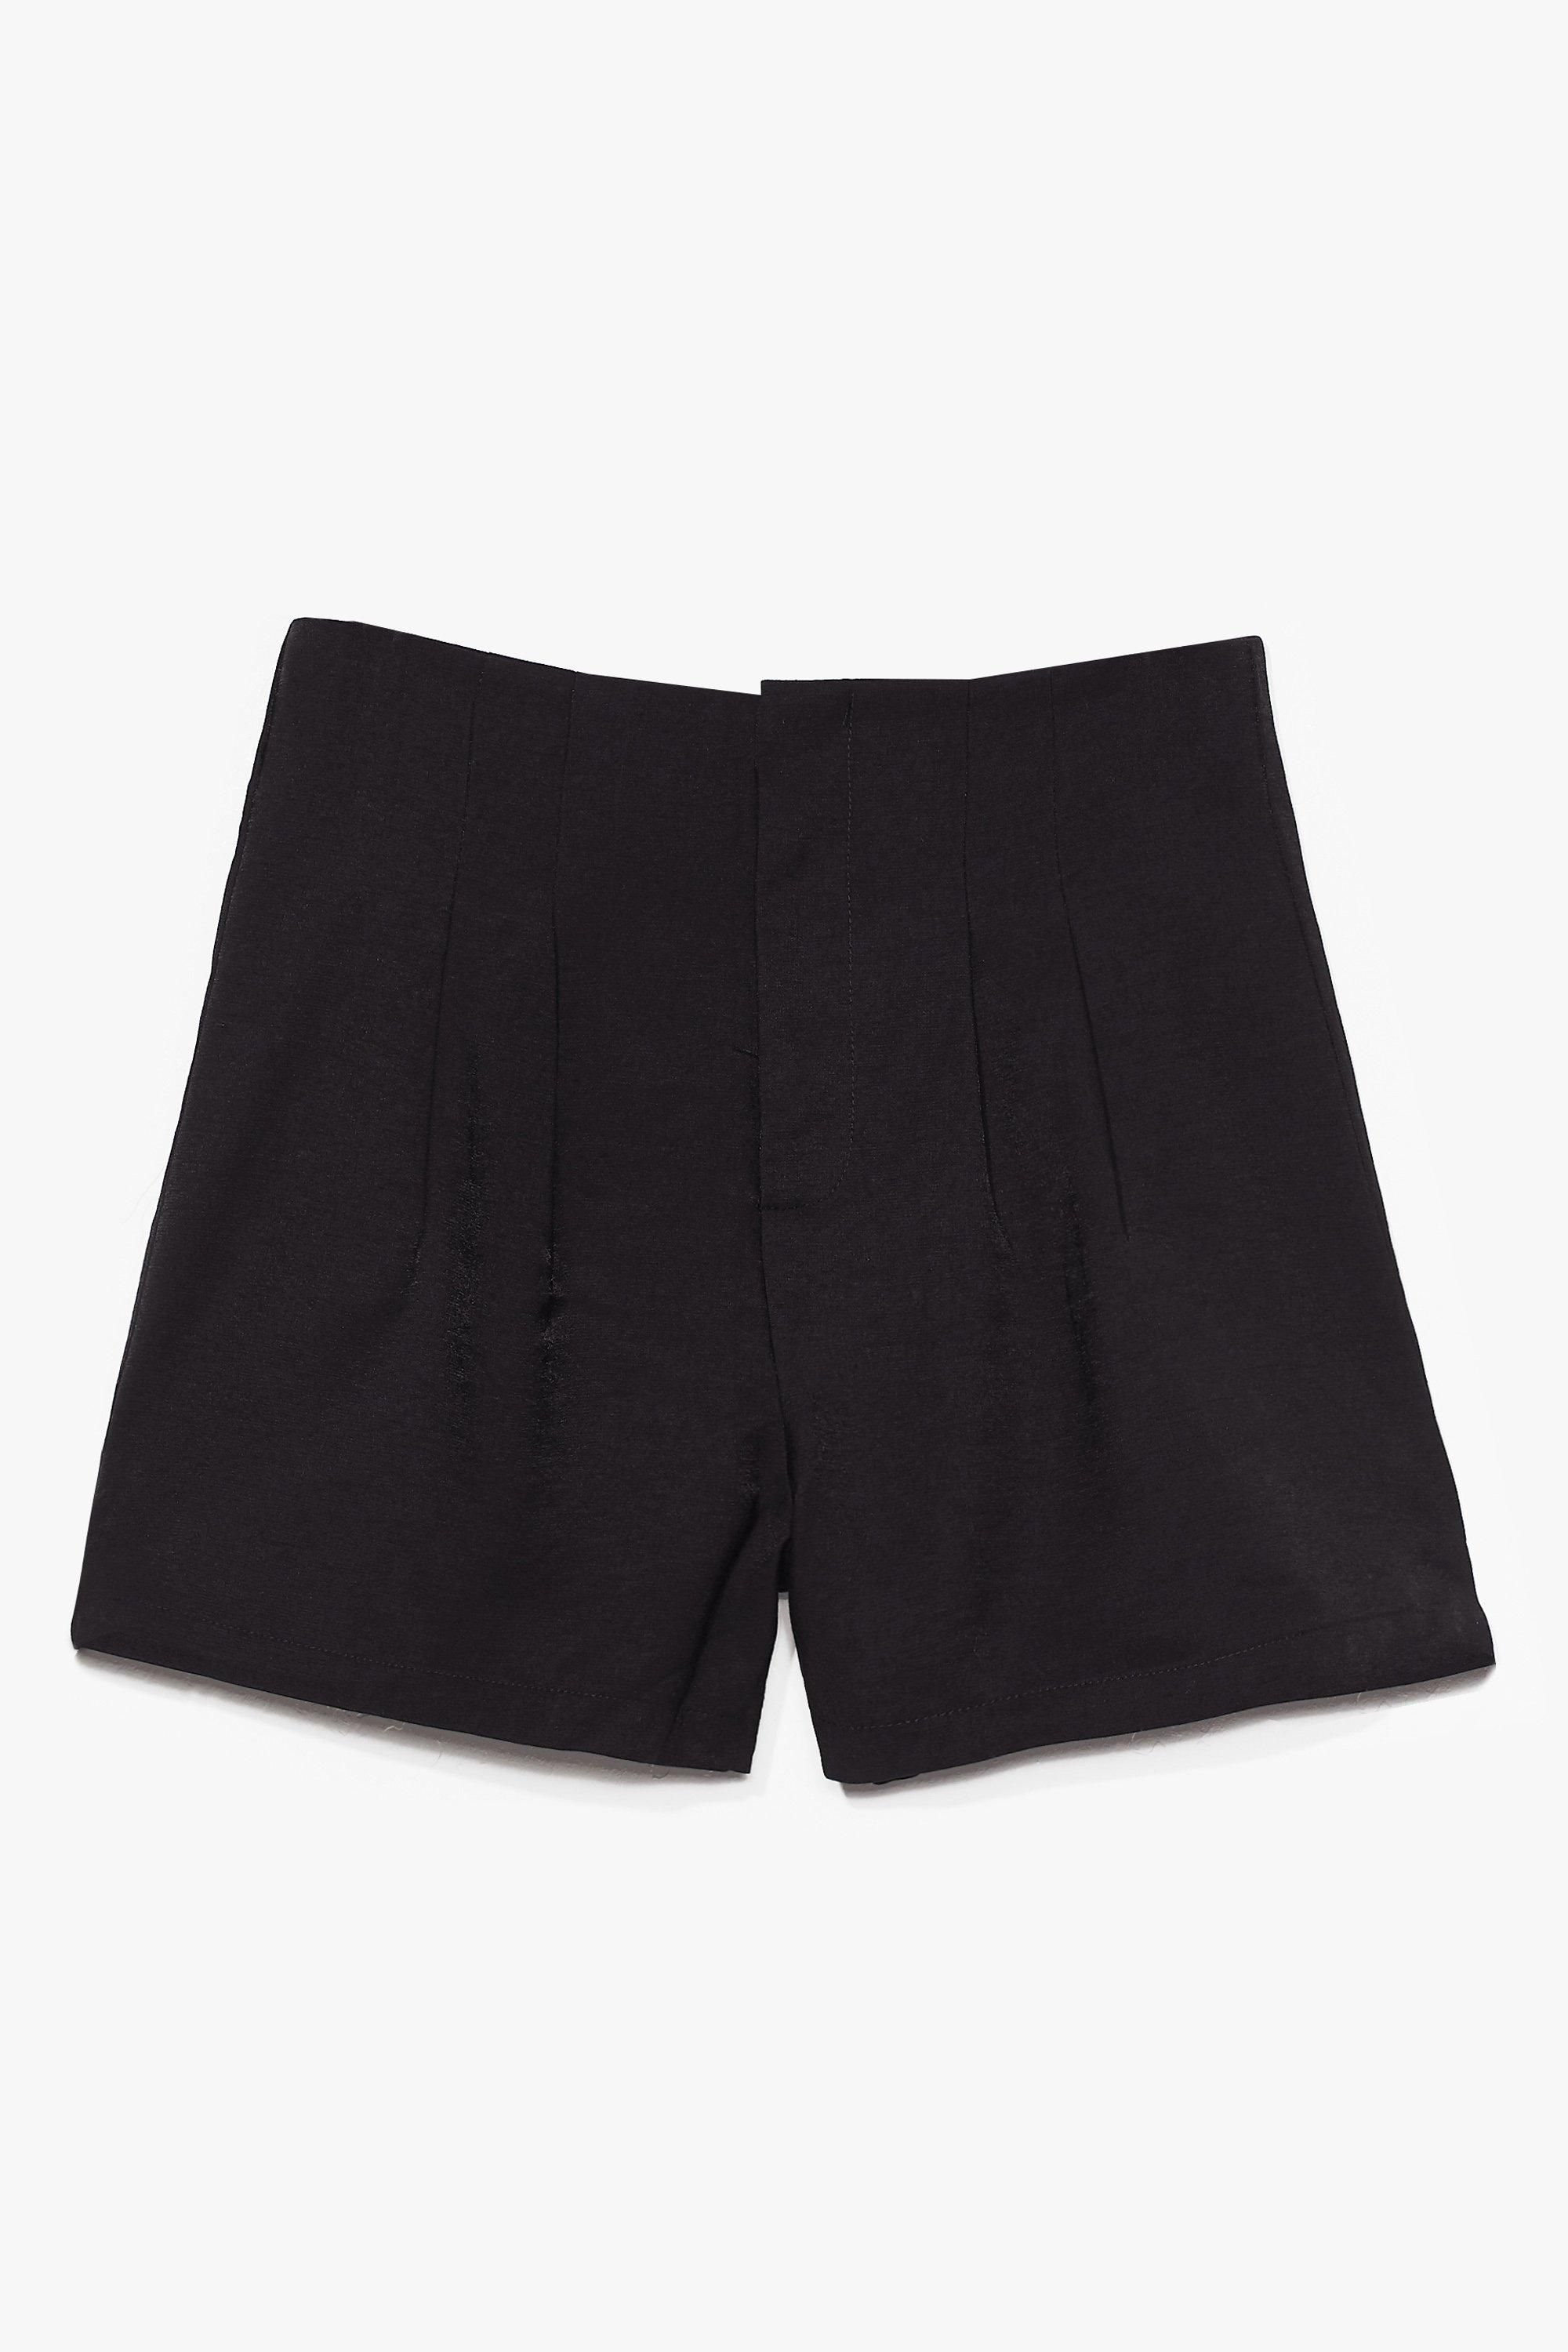 Save a Pleat for Me High-Waisted Shorts | NastyGal (UK, IE)